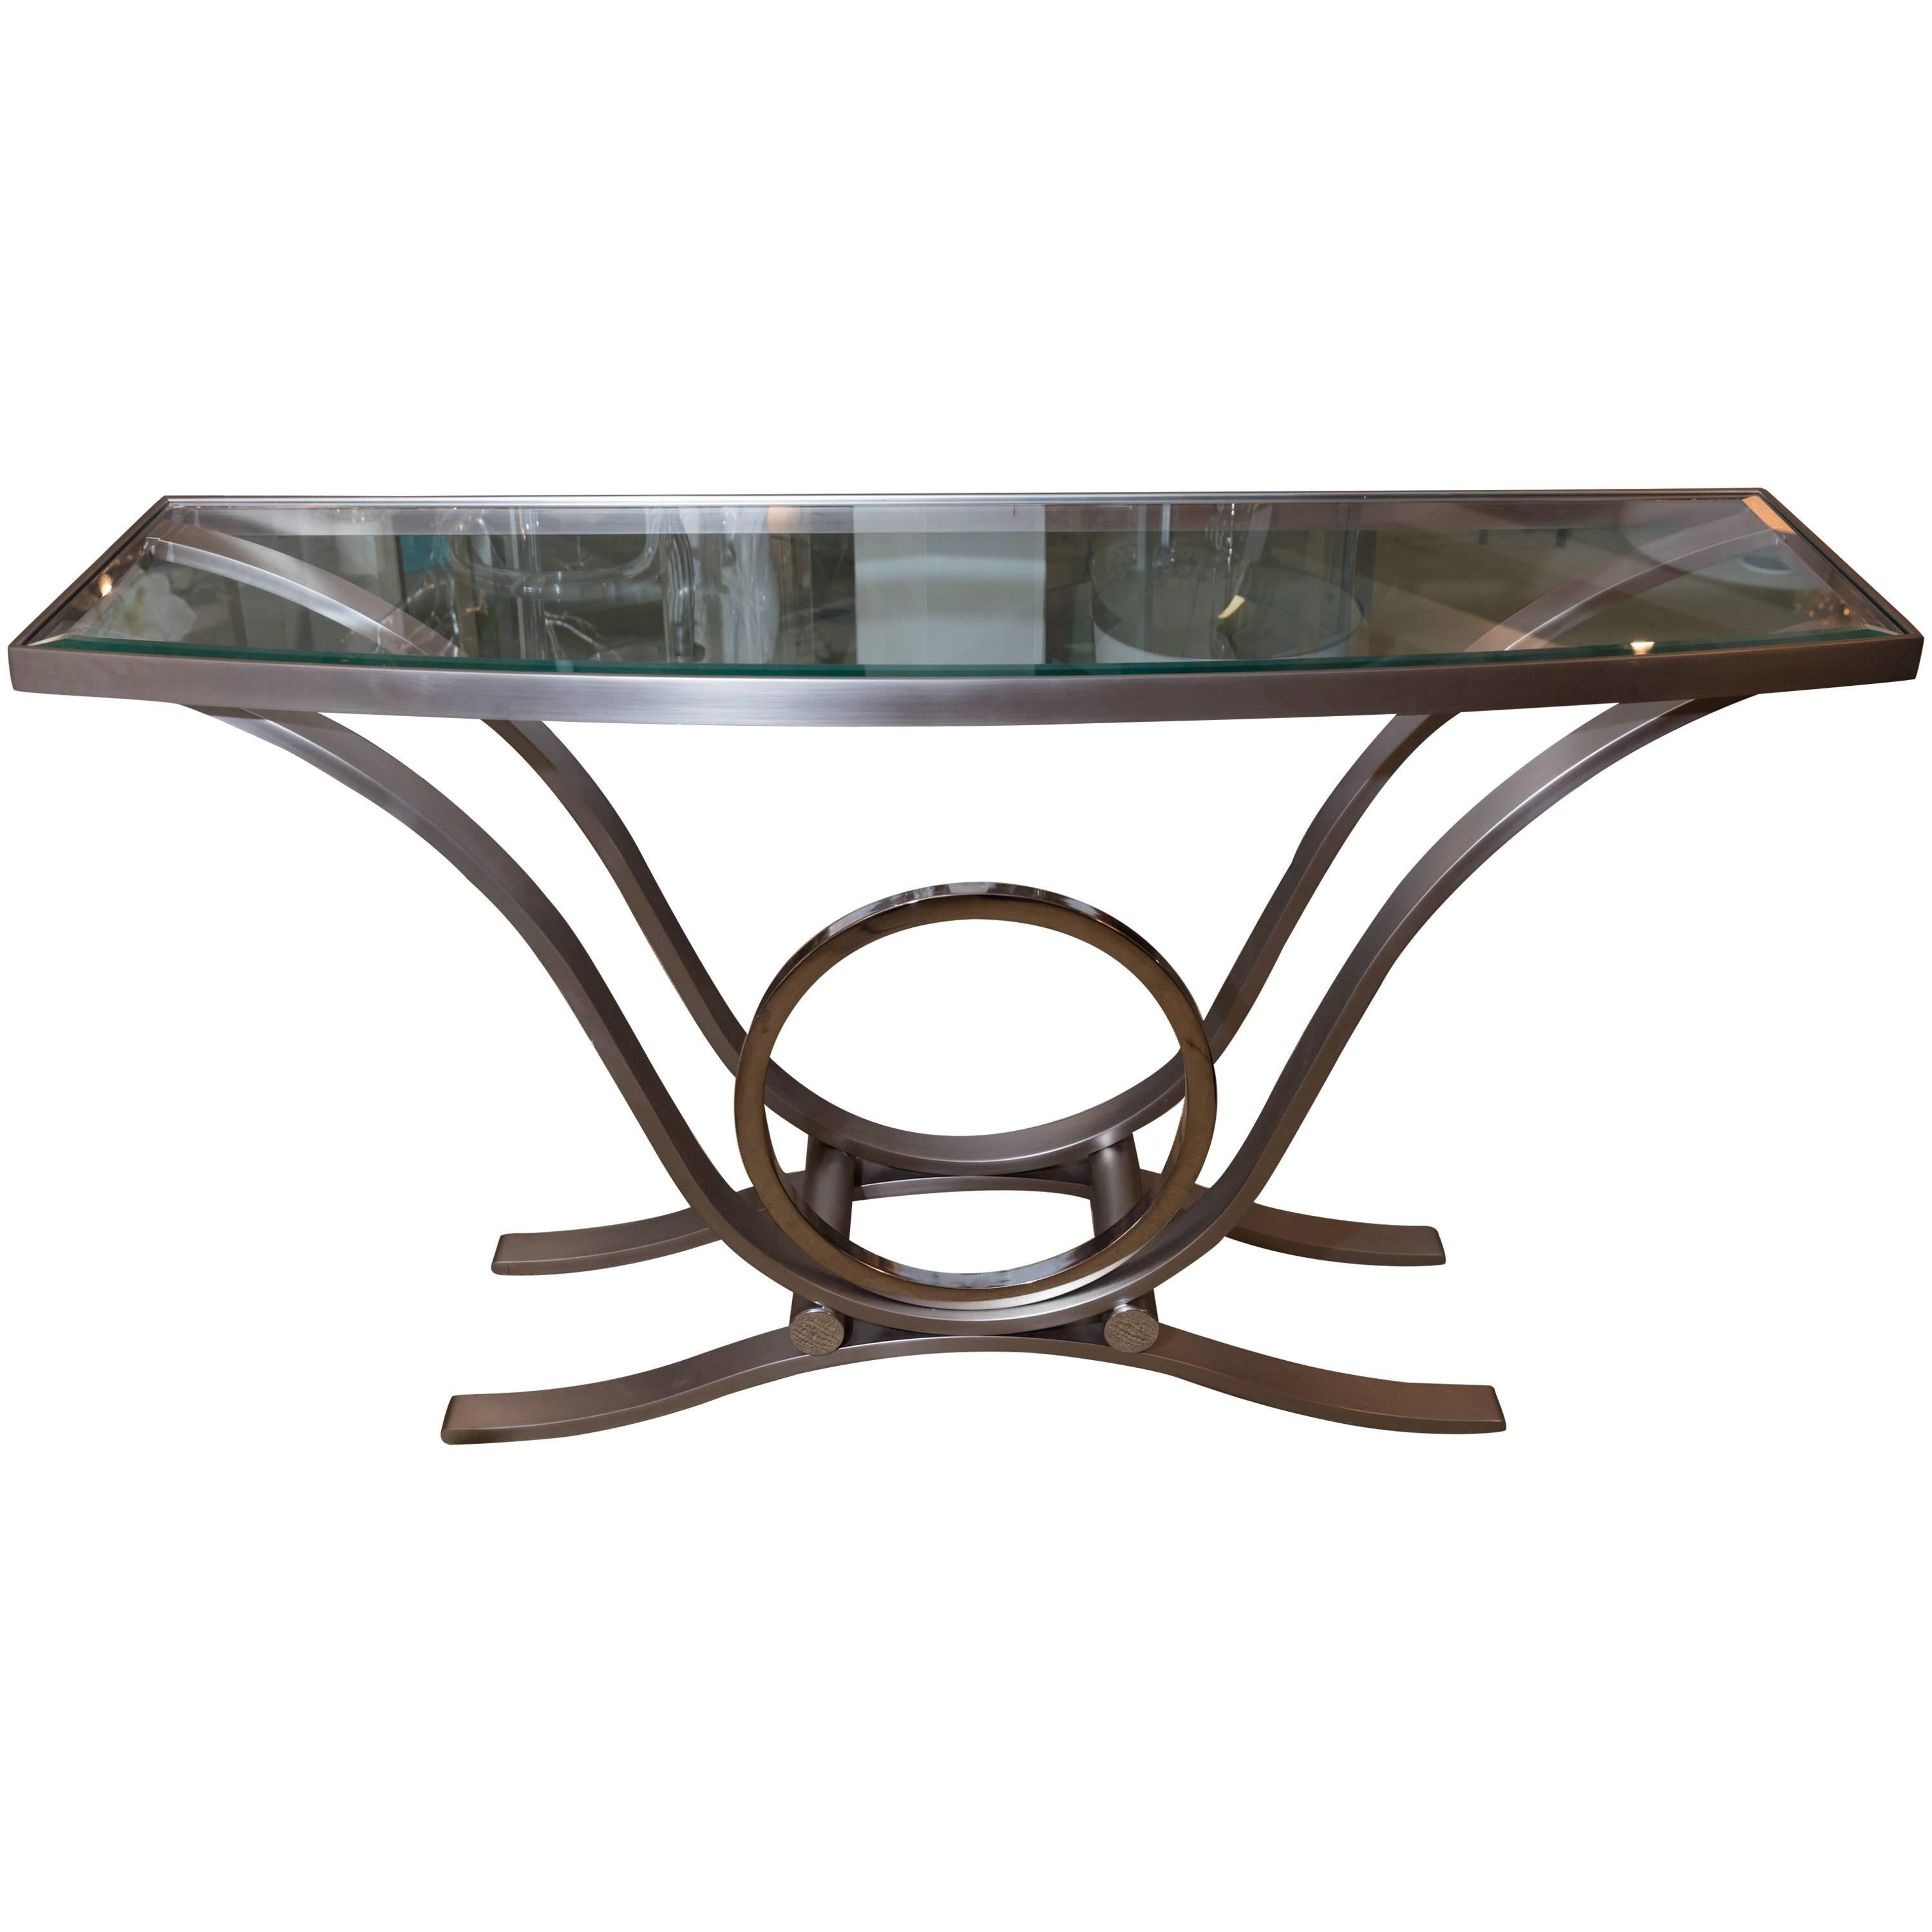 Attractive Metal Console with Inset Beveled Glass Top